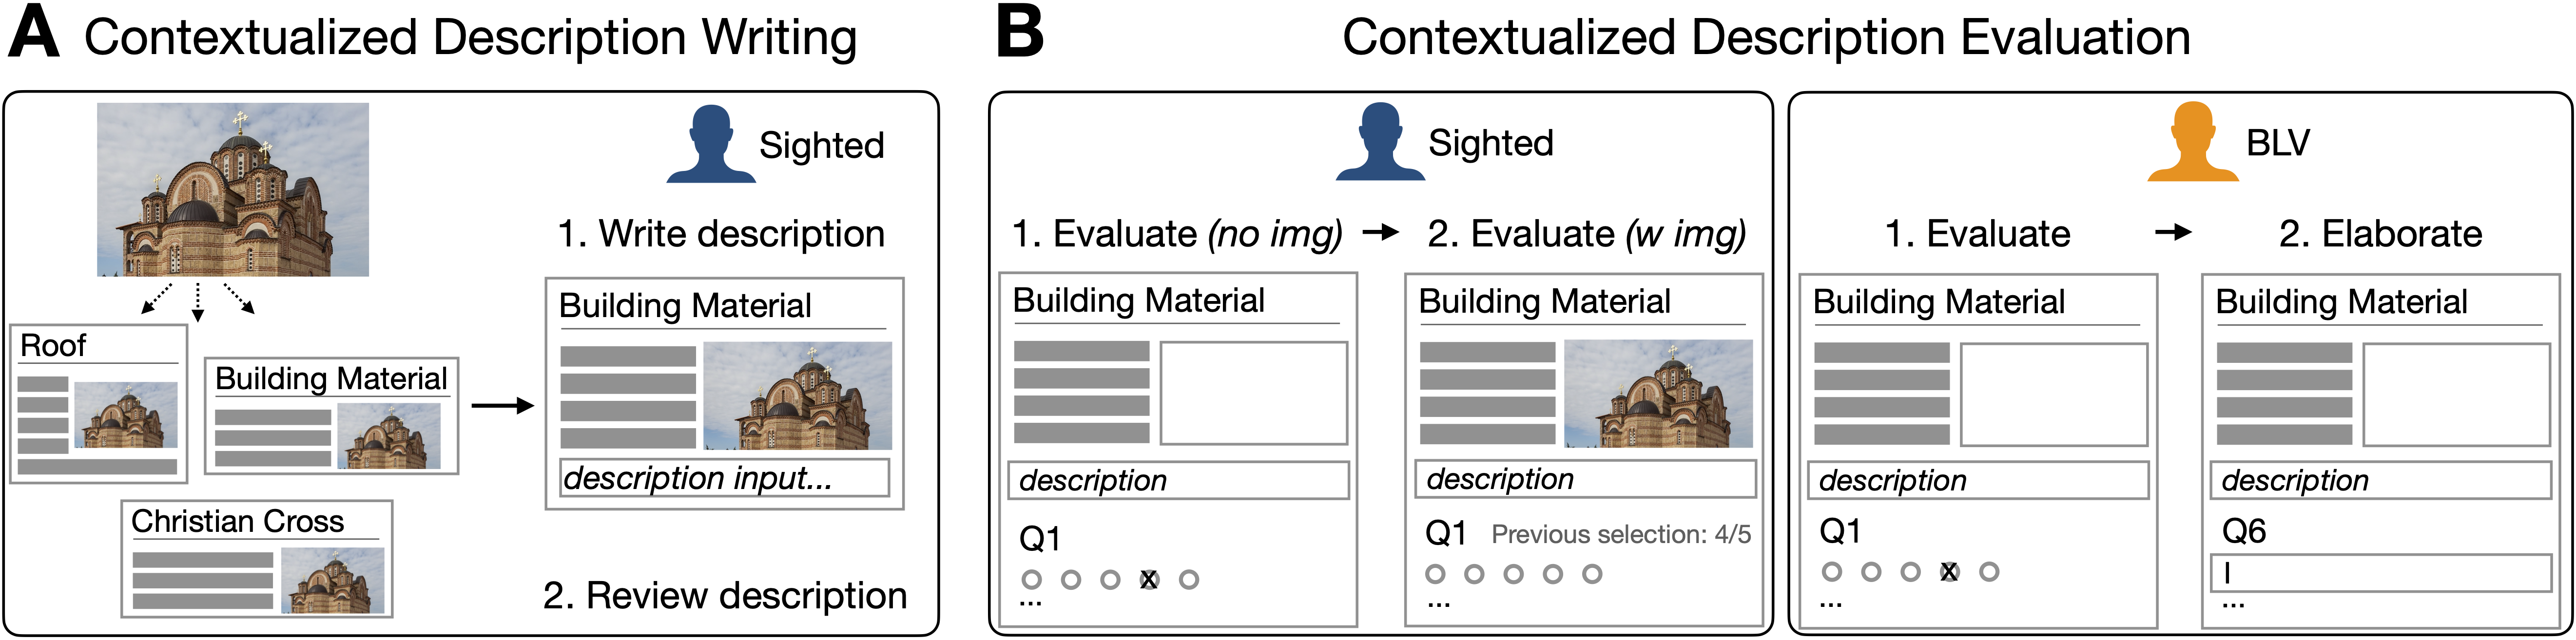 Overview of the data and experimental design. It consists of two blocks corresponding with the two main experiments: contextualized description writing, and contextualized description evaluation. In the contextualized description writing experiment, the same image of a church is placed in three different Wikipedia articles: Roof, Building Material, and Christian Cross. The article on Building Material with the image is then shown to a sighted participant who is asked to write a description and to then review it for quality after the image has been removed from their view. The contextualized description evaluation experiment consists of two subparts, each with two phases: one with sighted participants, and one with BLV participants. Sighted participants first evaluated the description only having access to the context and not the image. Afterwards, they evaluated again while being able to see the image. They could also view their previous selection for each question. BLV participants completed a similar first phase, evaluating the description while having access to the context. Afterwards, they were asked 5 additional open-ended questions.